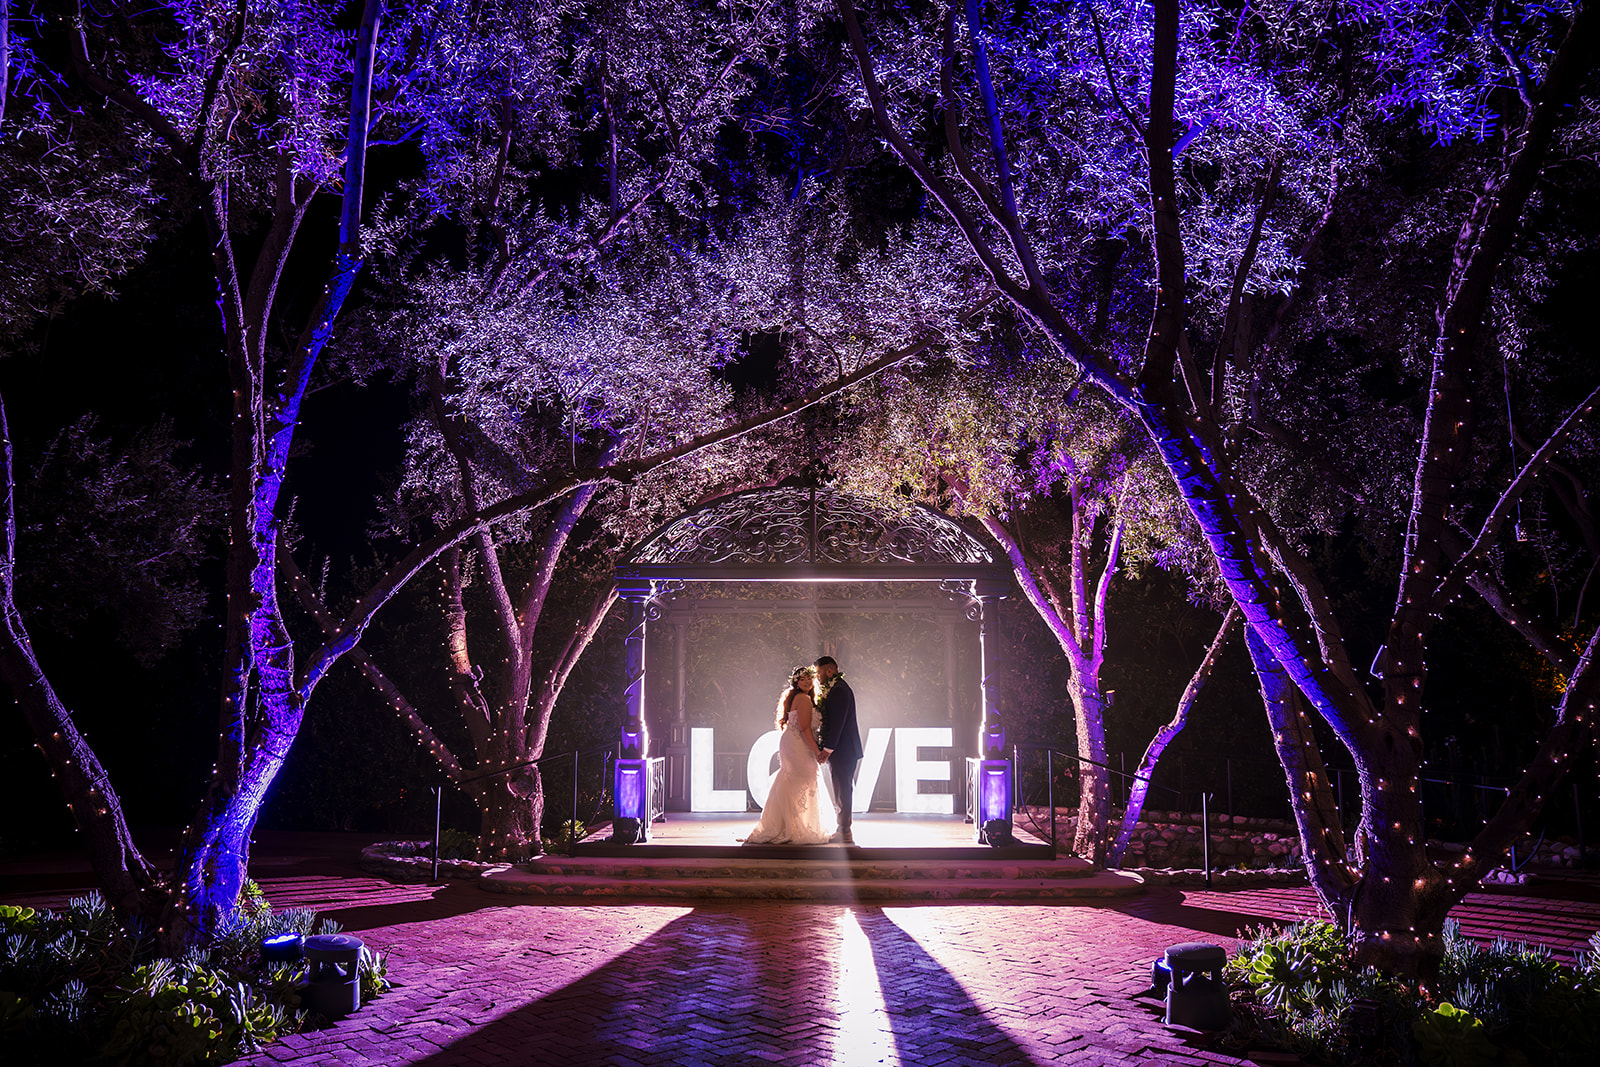 ThomasKim Photography Los Angeles Wedding Photographer A bride and groom standing in front of a lit up love sign.